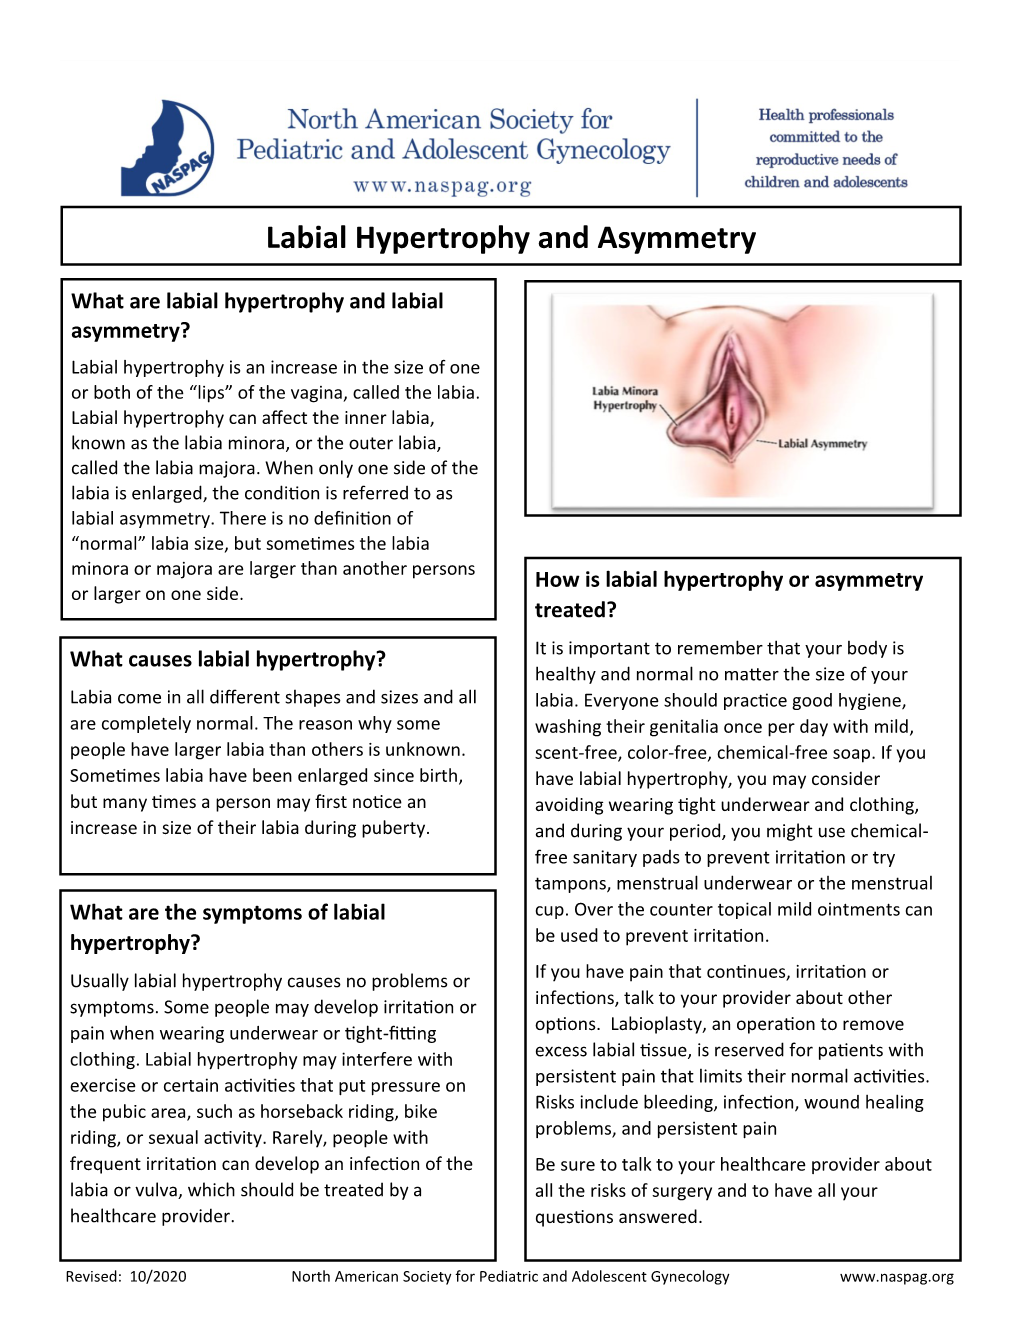 Labial Hypertrophy and Asymmetry